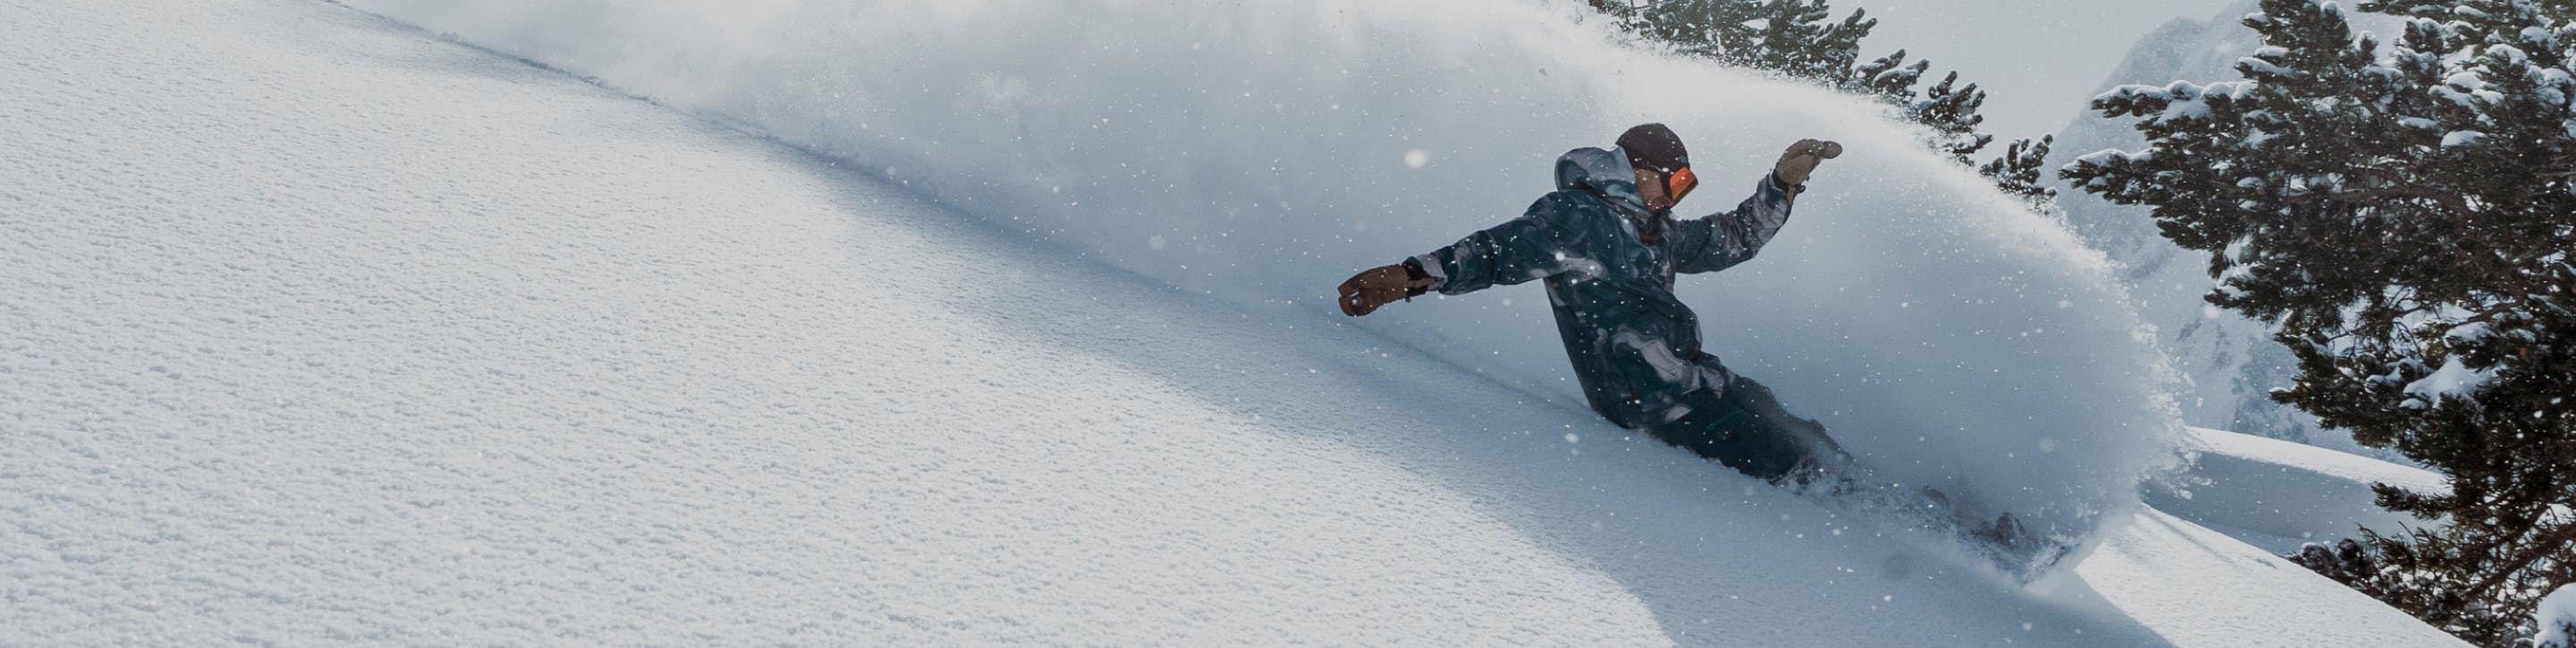 A snowboarder is shown brushing up a lot of snow on a mountain